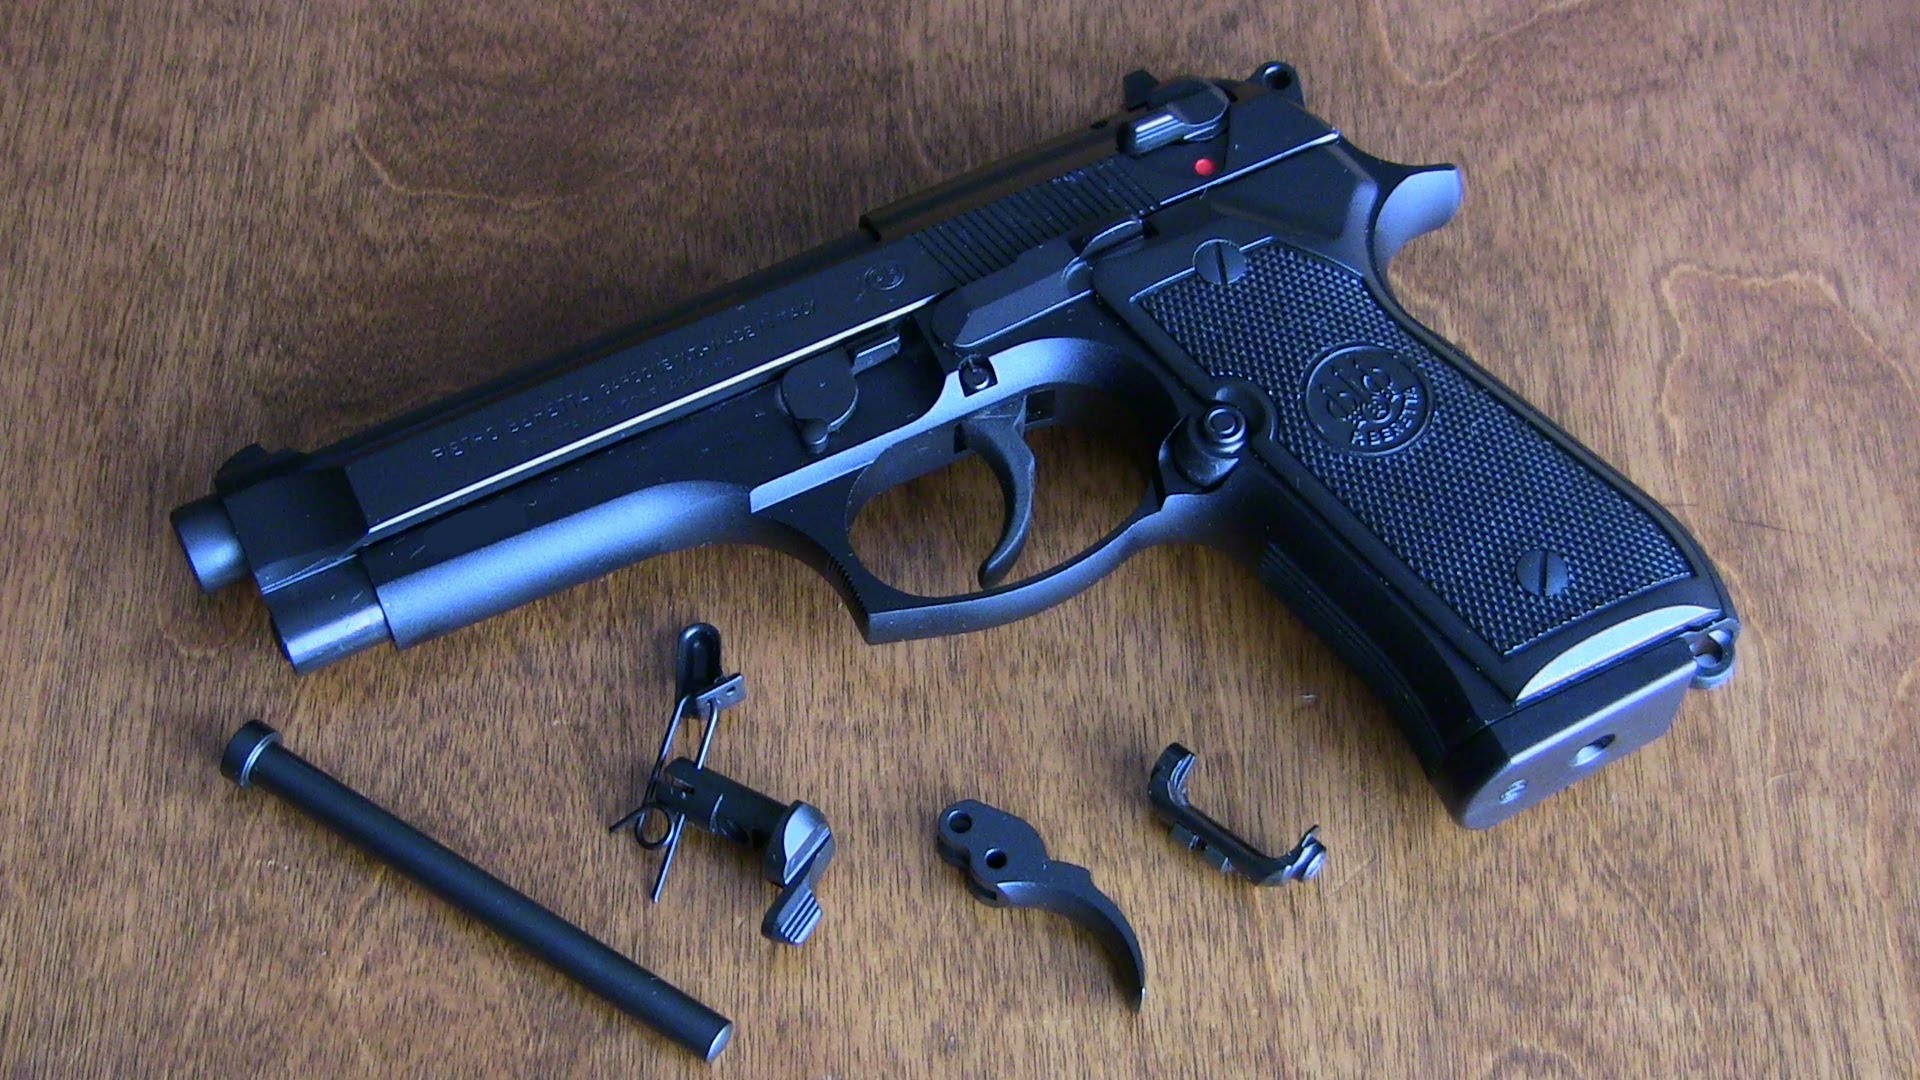 Beretta 92fs Wallpaper Image Photos Pictures Background